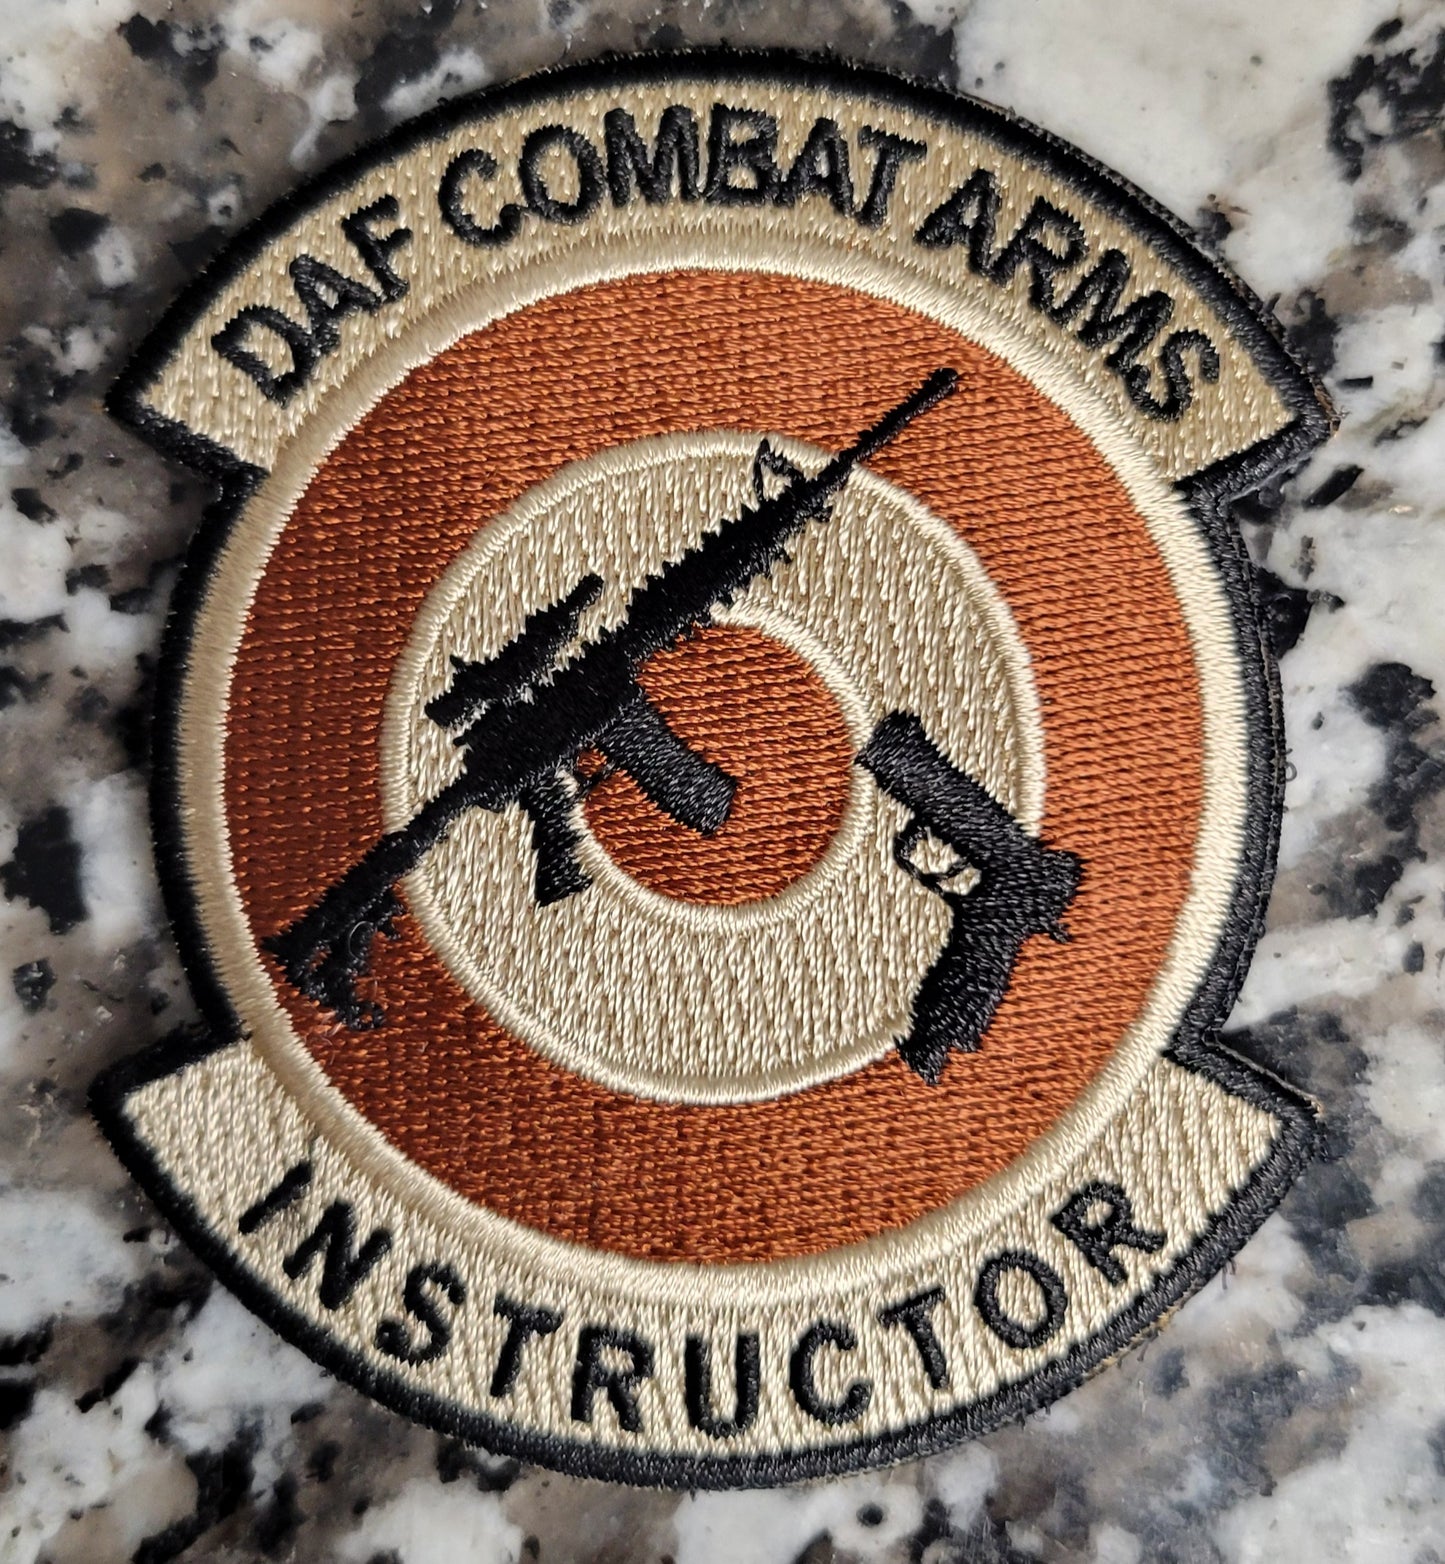 DAF Combat Arms Instructor Patch (Embroidered or UV Printed Version)